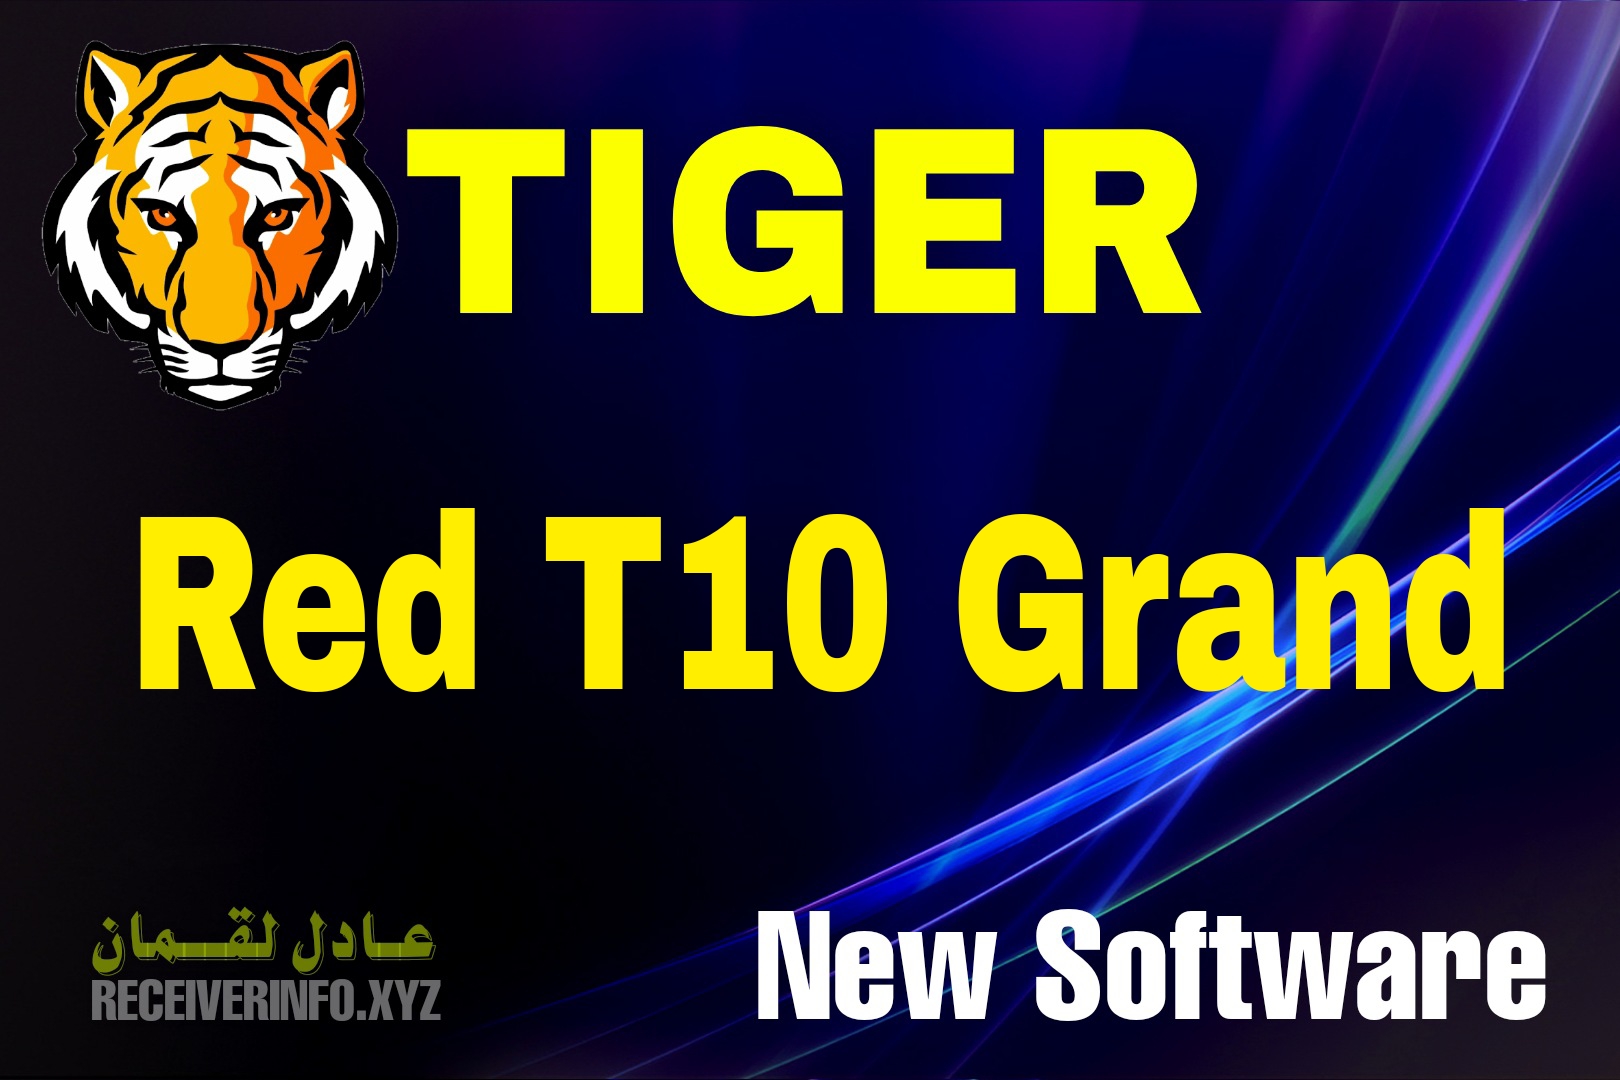 Tiger Red T10 Grand,Red Tiger Receiver Software,Tiger Receiver,Tiger Receiver Software,